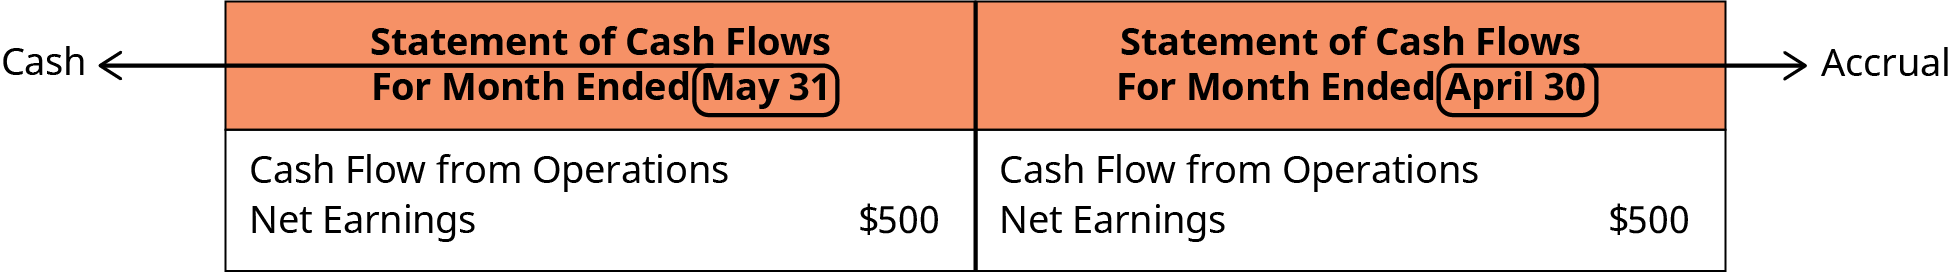 A simple depiction of credit versus cash. On the left side, the statement of cash flows for the month ended May 31 shows cash flow from operations net earnings of $500 as cash. On the right side, the statement of cash flows for the month ended April 30 shows cash flow from operations net earnings of $500 as an accrual.